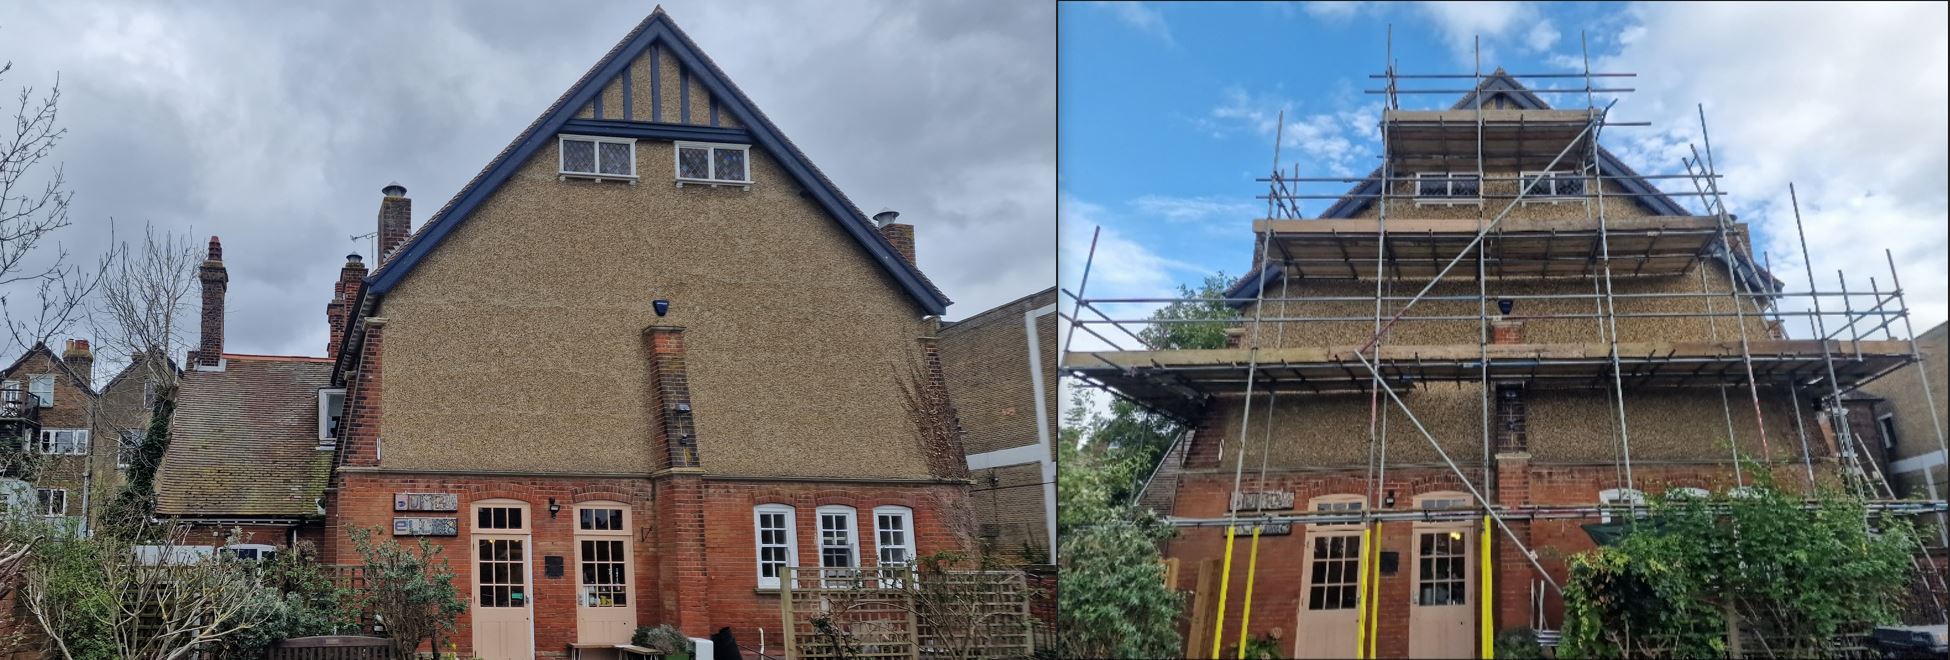 Before image on left showing damage to the exterior of a building. Image on the right shows scaffolding on the building with on-going construction work.